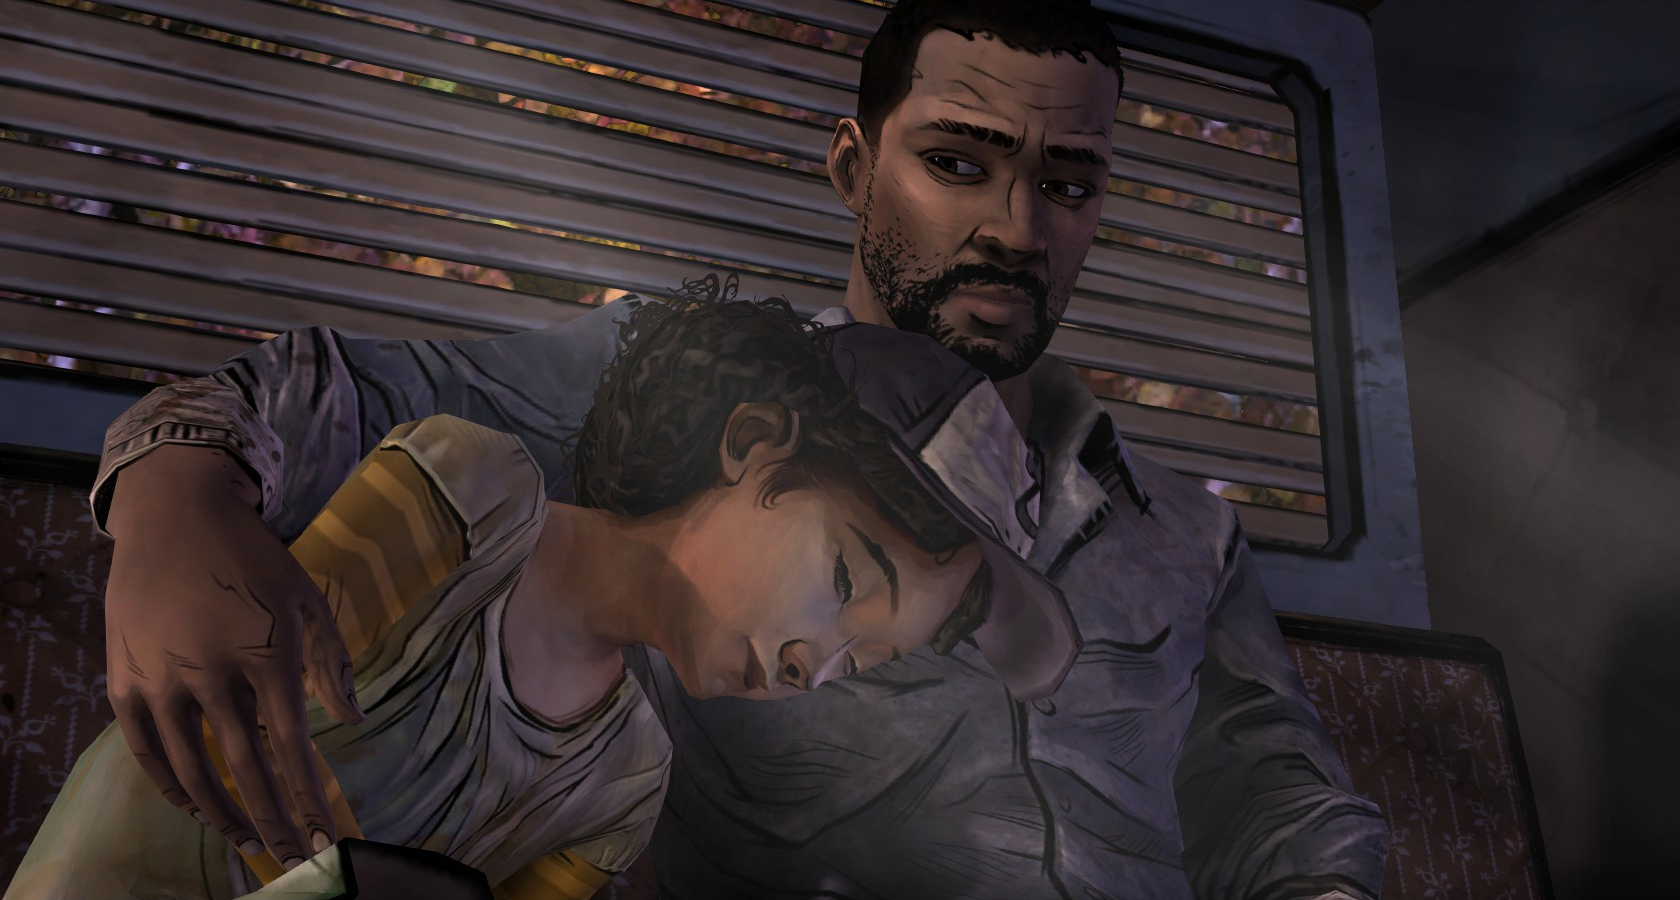 Telltale Games – it’s all up to me?